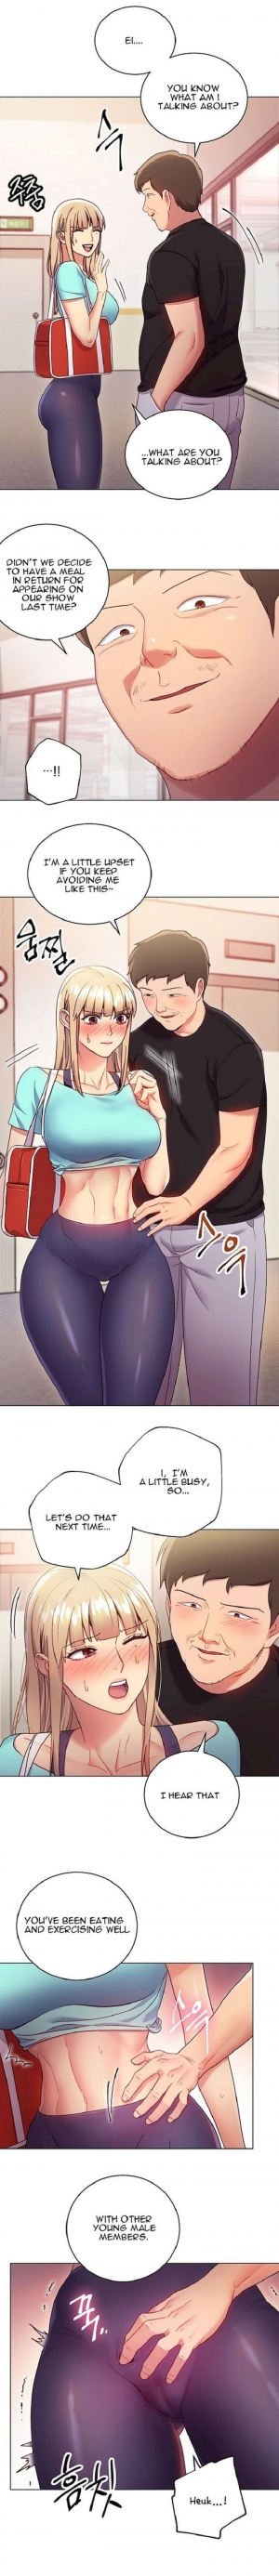 [Neck Pilllow] Stepmother Friends Ch.28/? [English] [Hentai Universe] - Page 151